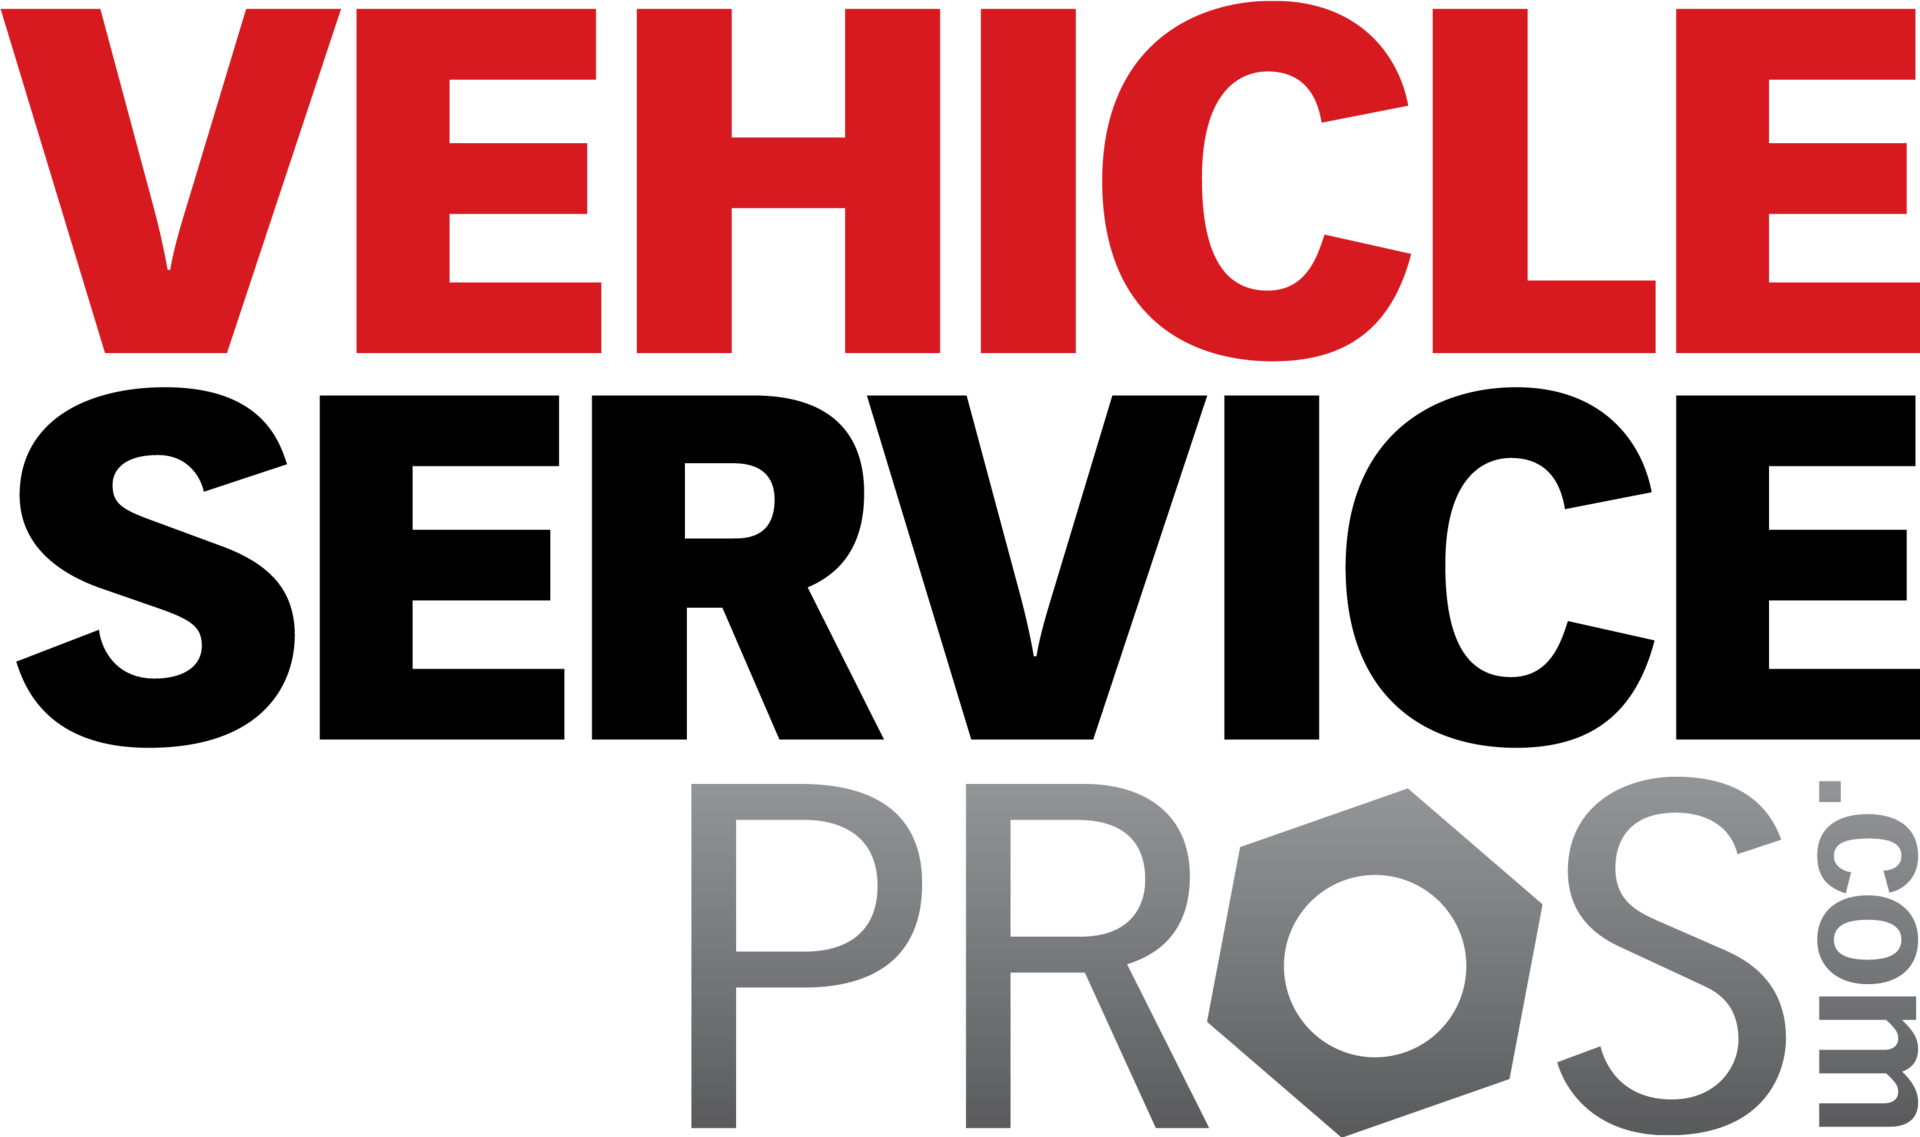 Vehicle Service Pros Logo in full color